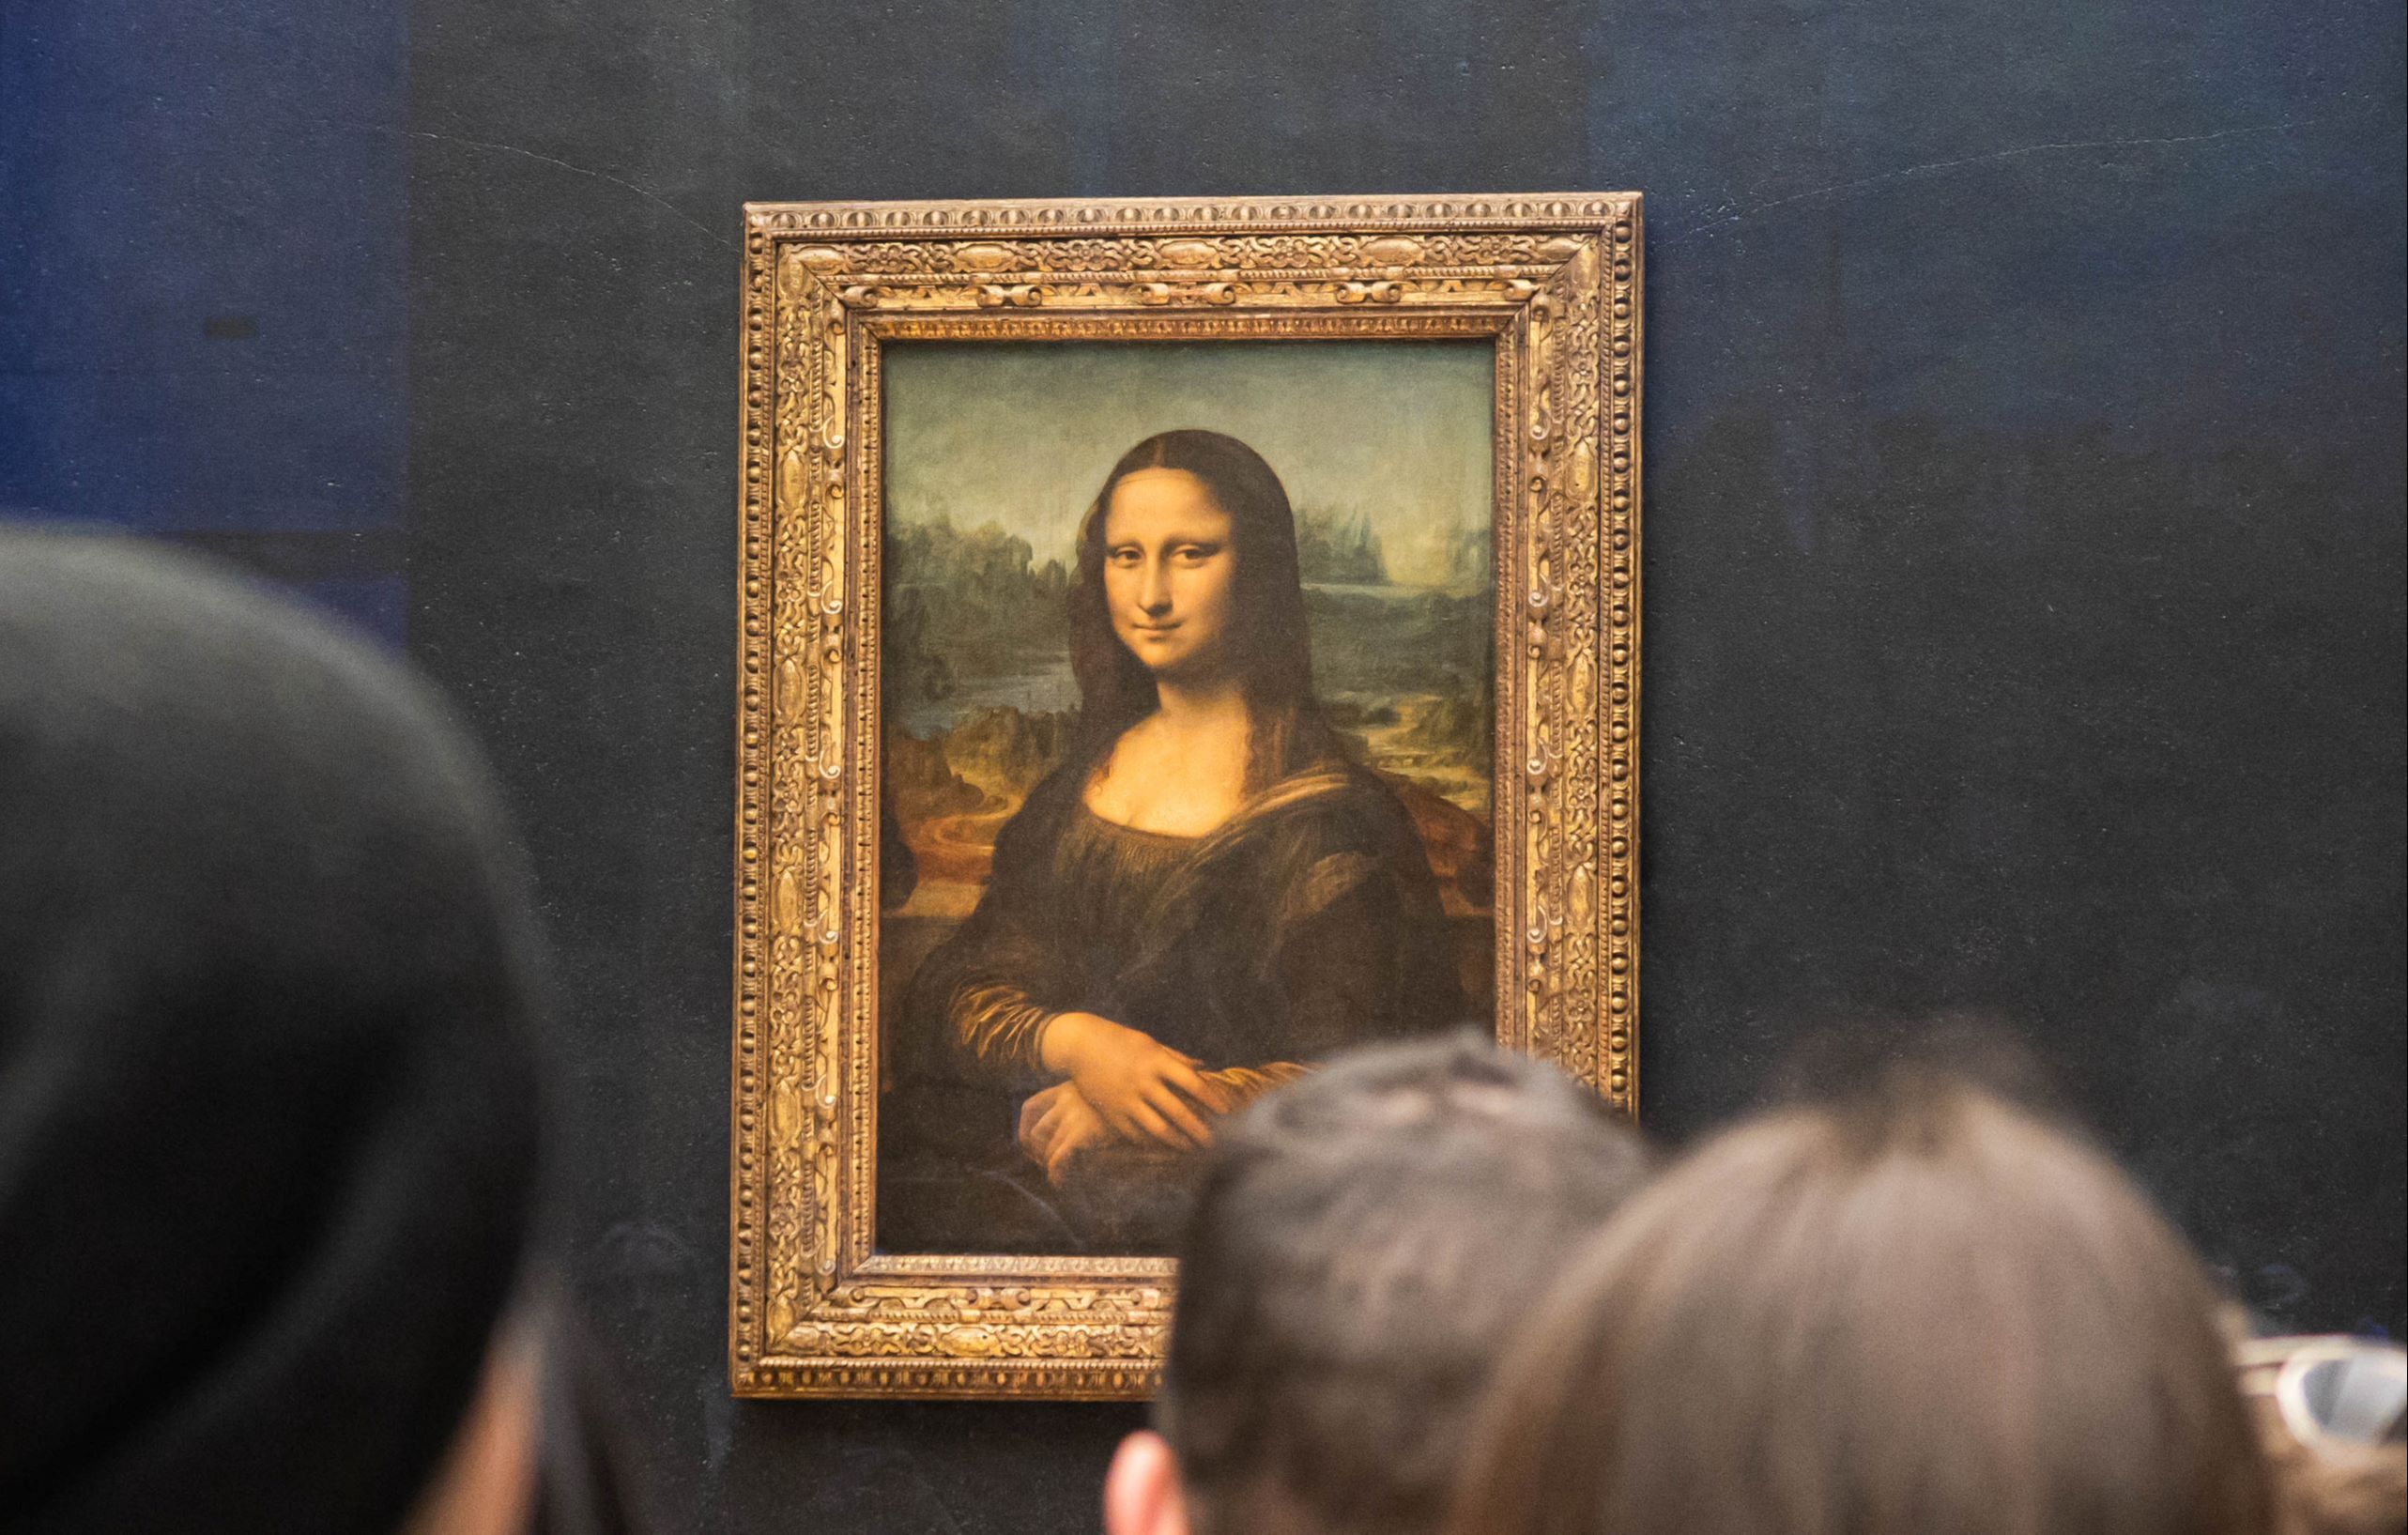 Entrance to the Louvre museum with access to Mona Lisa painting (reserved access) and Orsay ticket